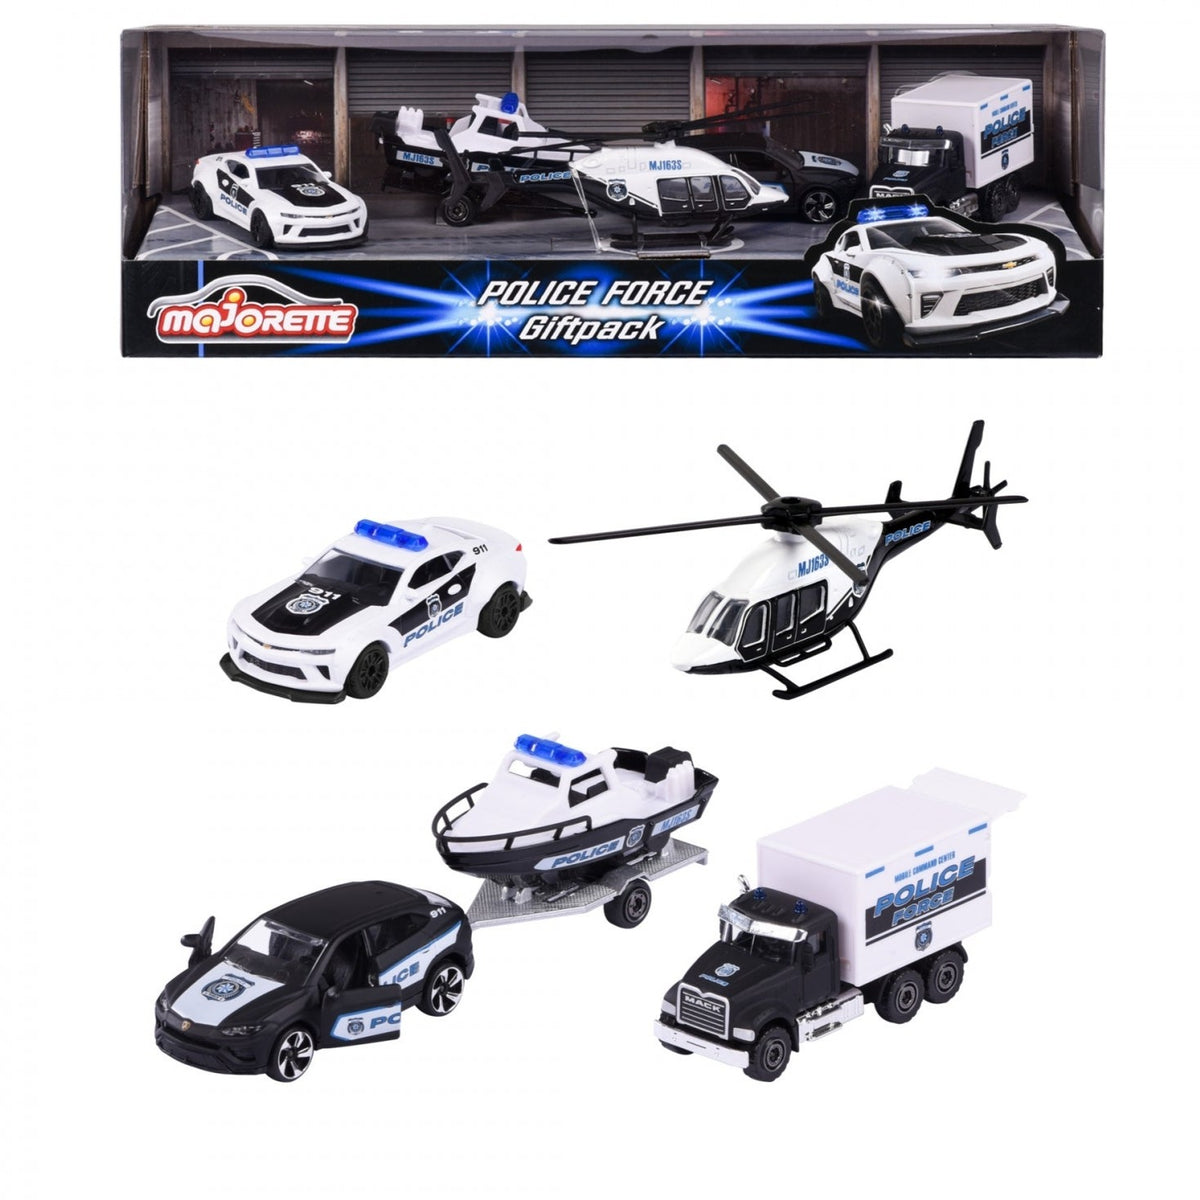 Majorette Police Force Black and White 4 Car Gift Set For Kids Ages 3+